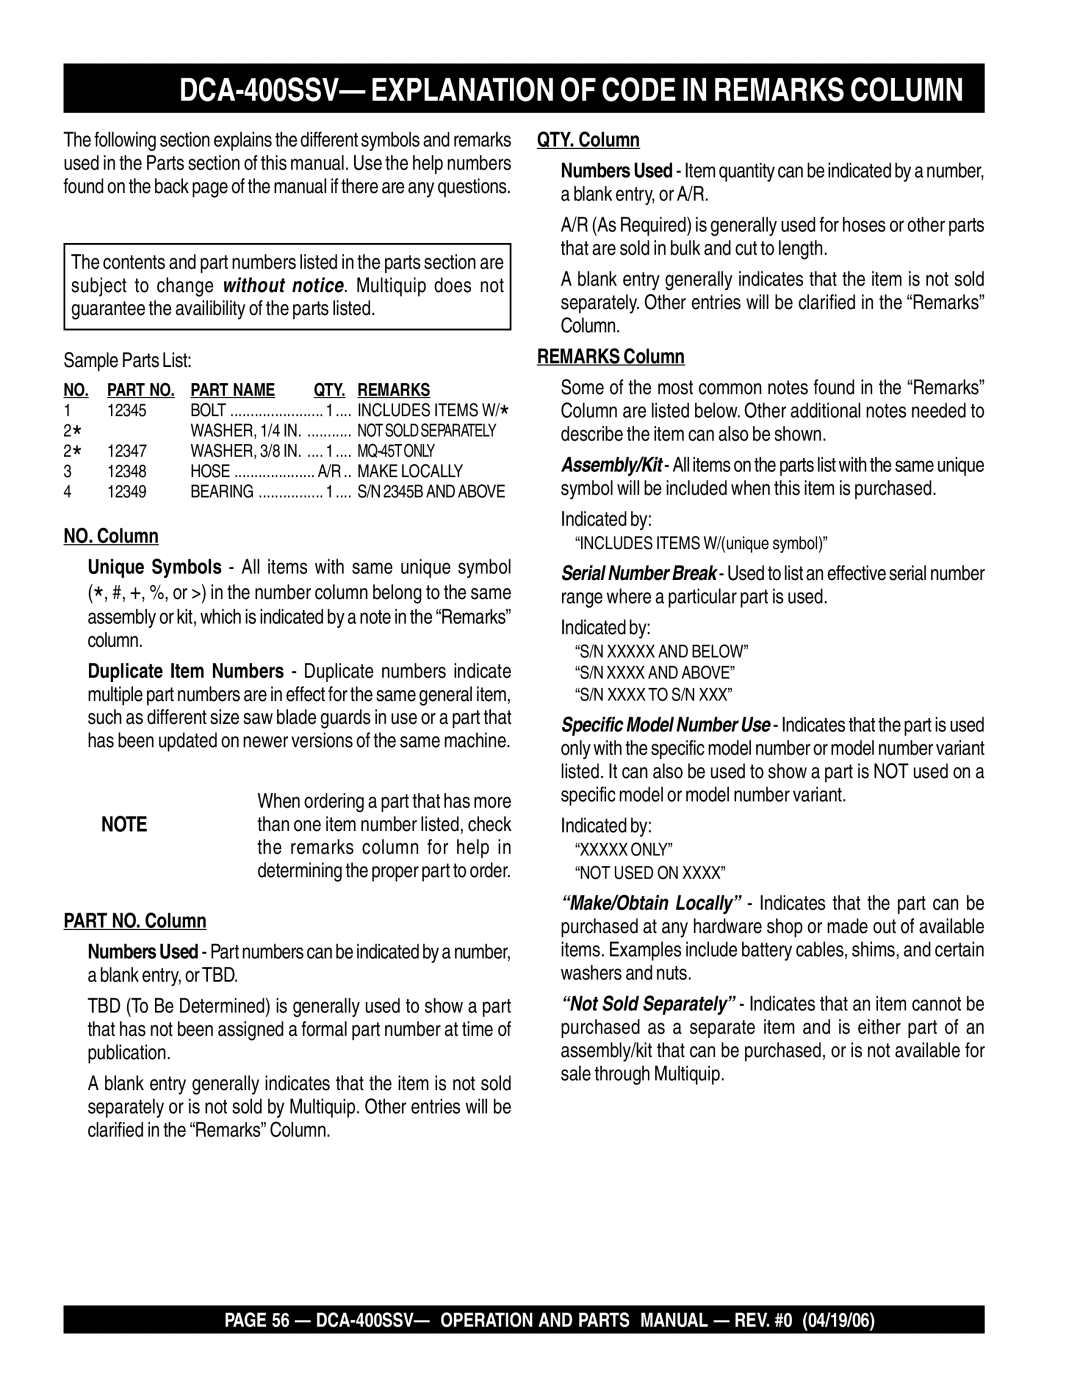 Multiquip operation manual DCA-400SSV- Explanation of Code in Remarks Column, Sample Parts List 